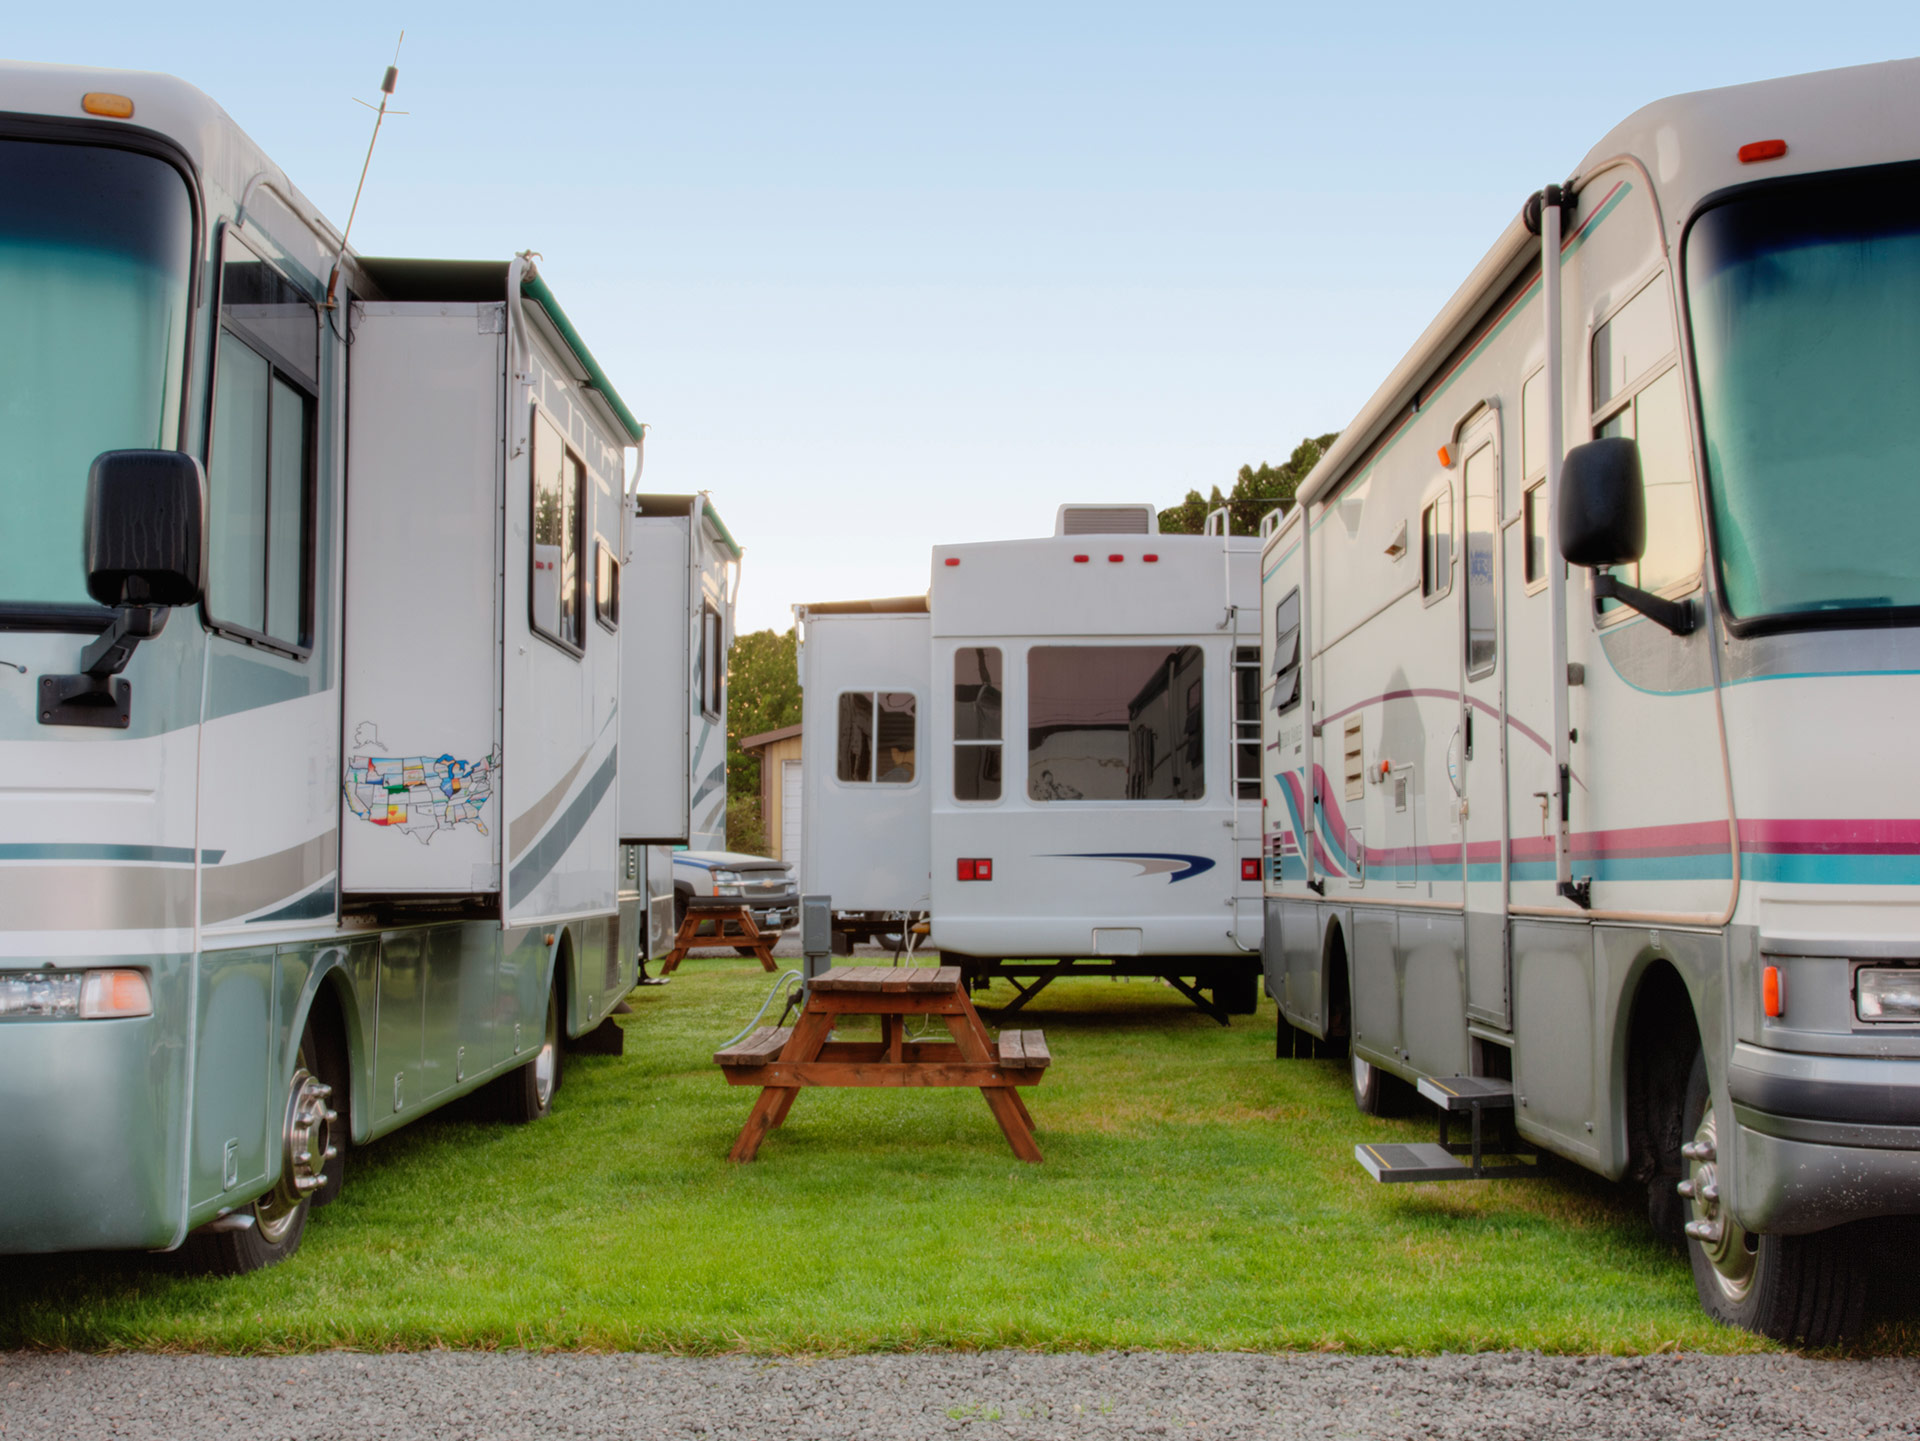 Australian caravan parks have more to offer than ever before